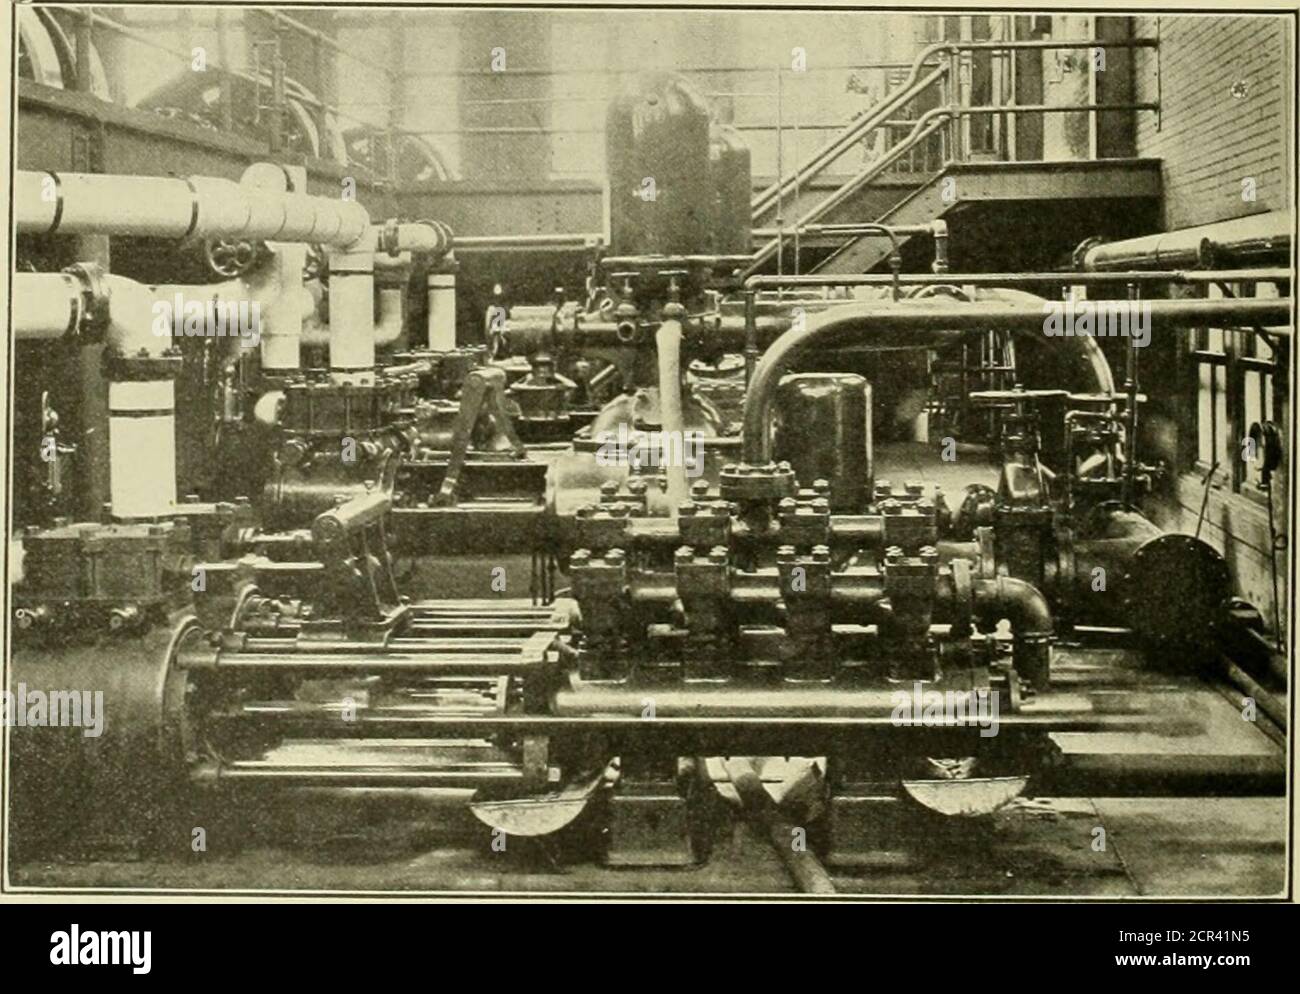 . American engineer and railroad journal . Callaghan. The Angus shops of the Canadian Pacific Railway, locatedat Montreal, are the largest group of railway shops on thecontinent, covering as they do an area of 250 acres, with 17acres under roof, and consisting of the following shops: Loco-motive erecting and machine shop, gray iron foundry, wheel ♦Abstract of a paper presented at the recent convention of theRailway Storekeepers Association. The part referring to the wheelfoundry, the frog and switch shop, paint and lumber, has been omitted.The Angus shops were described in the American Enginee Stock Photo